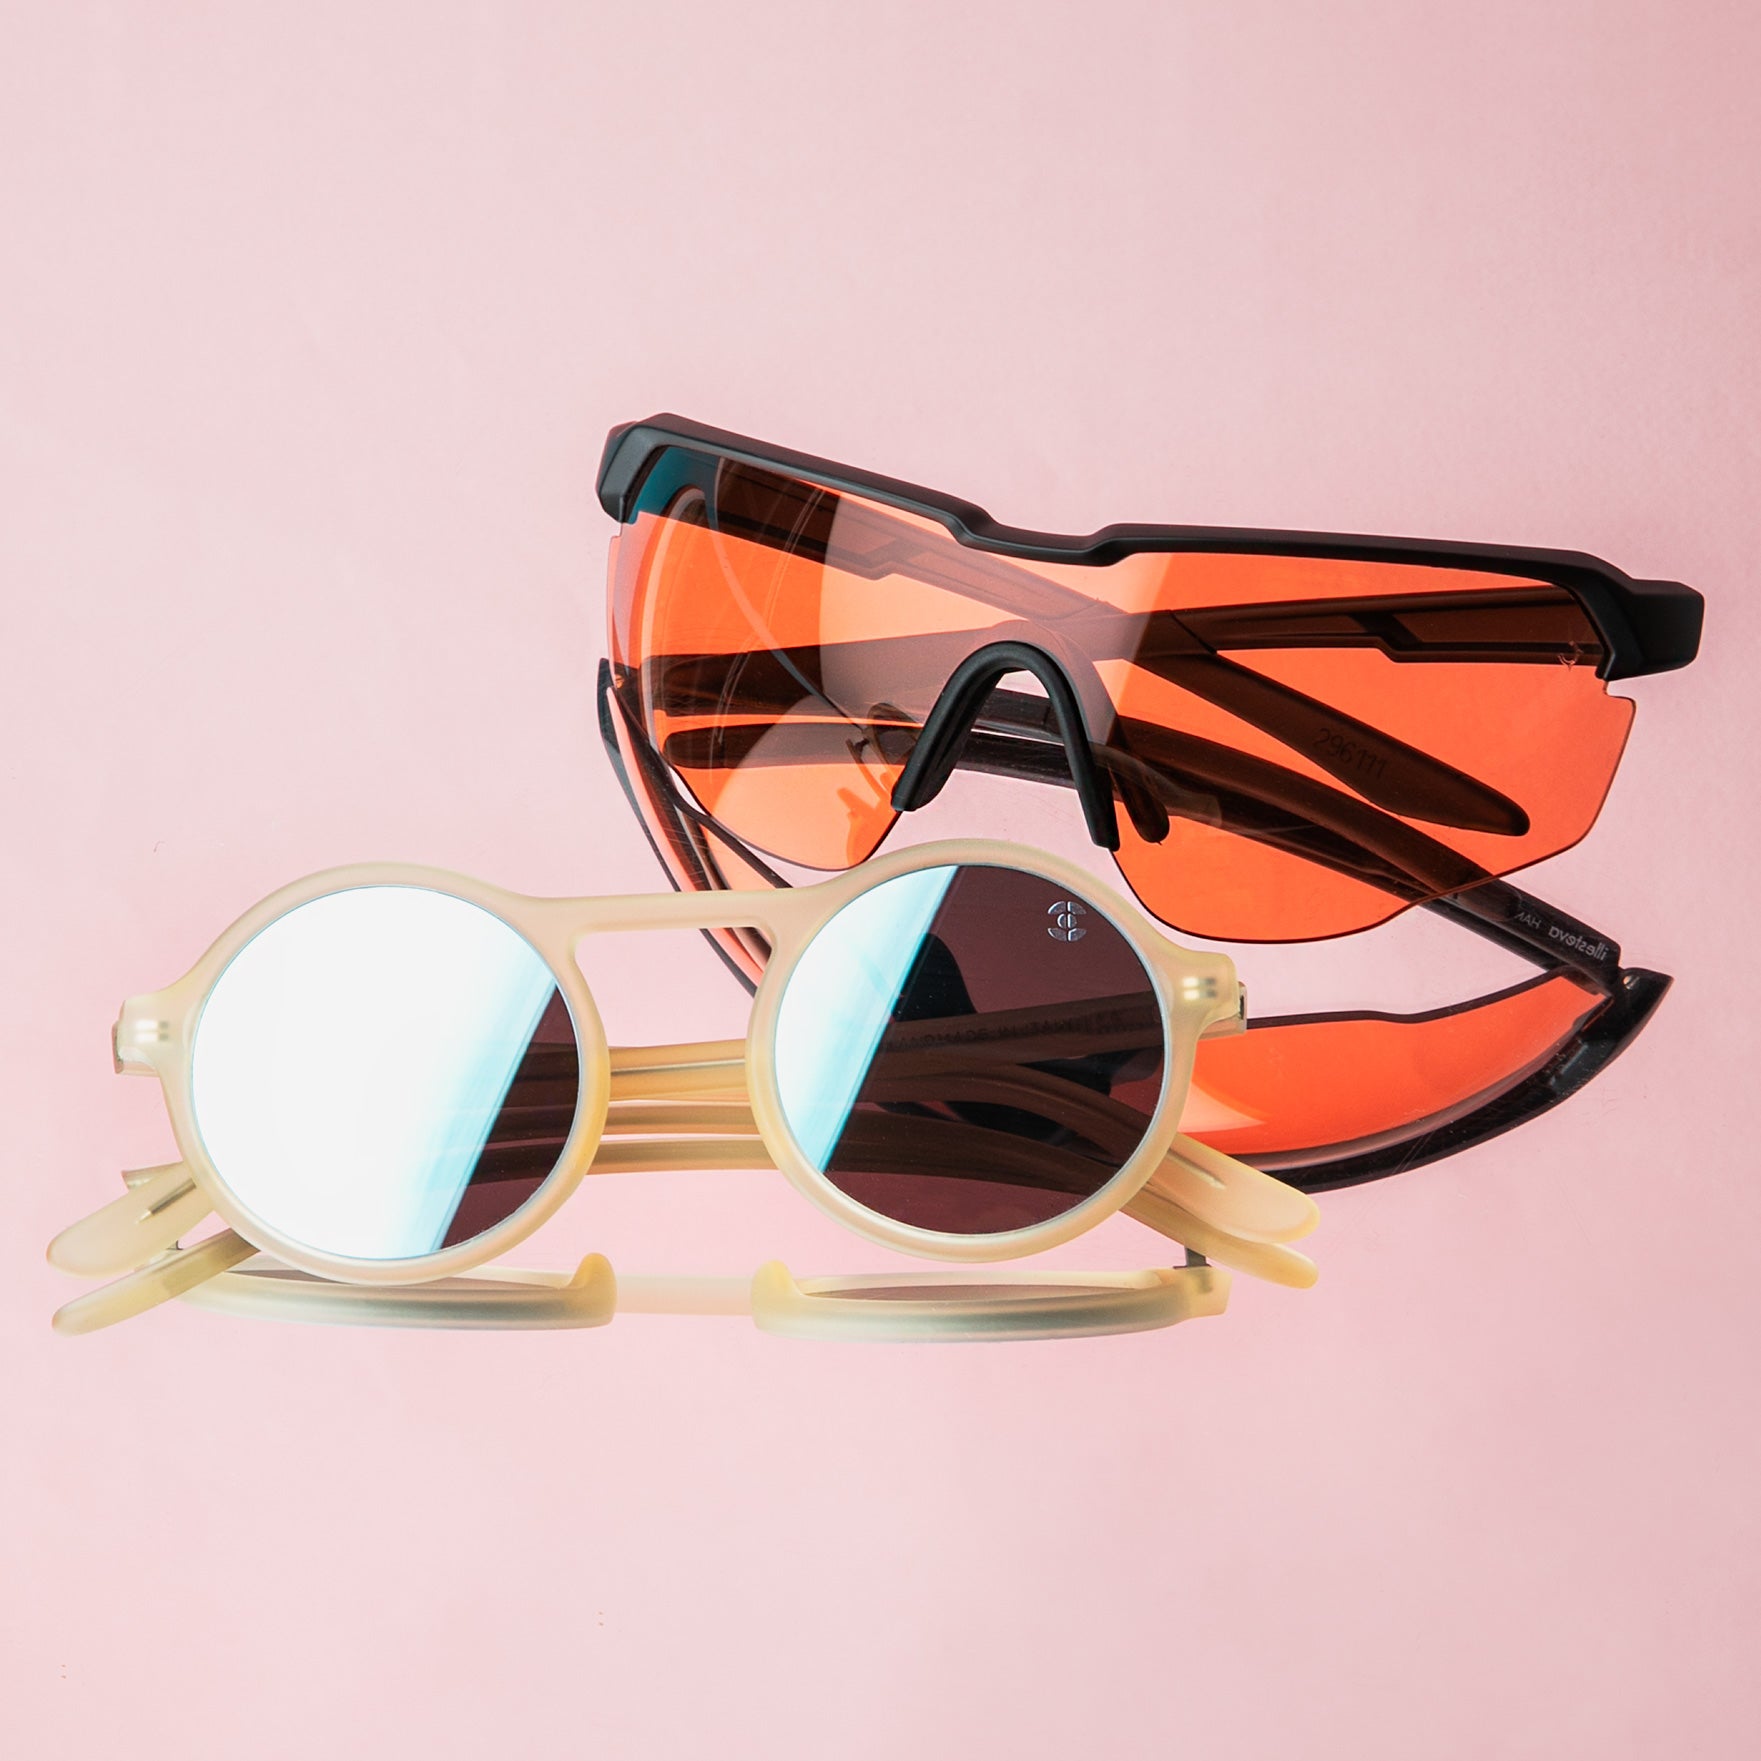 Both Dune x illesteva sunglasses shown on a pale pink background